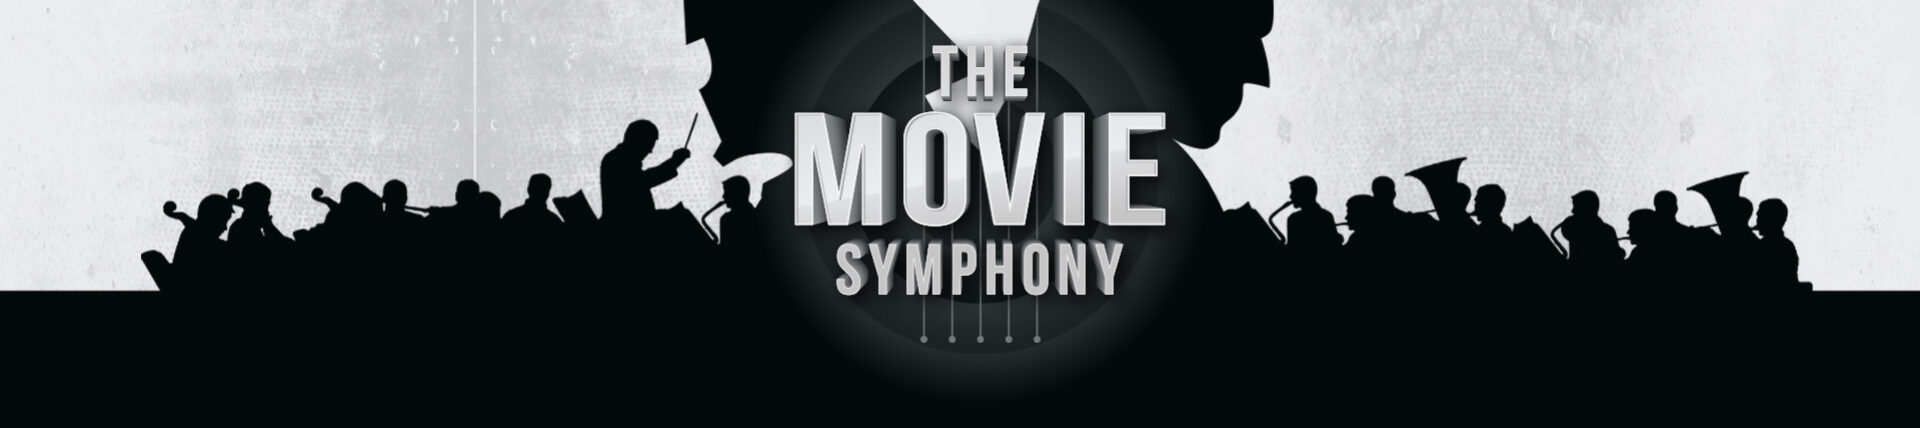 The Movie Symphony Banner